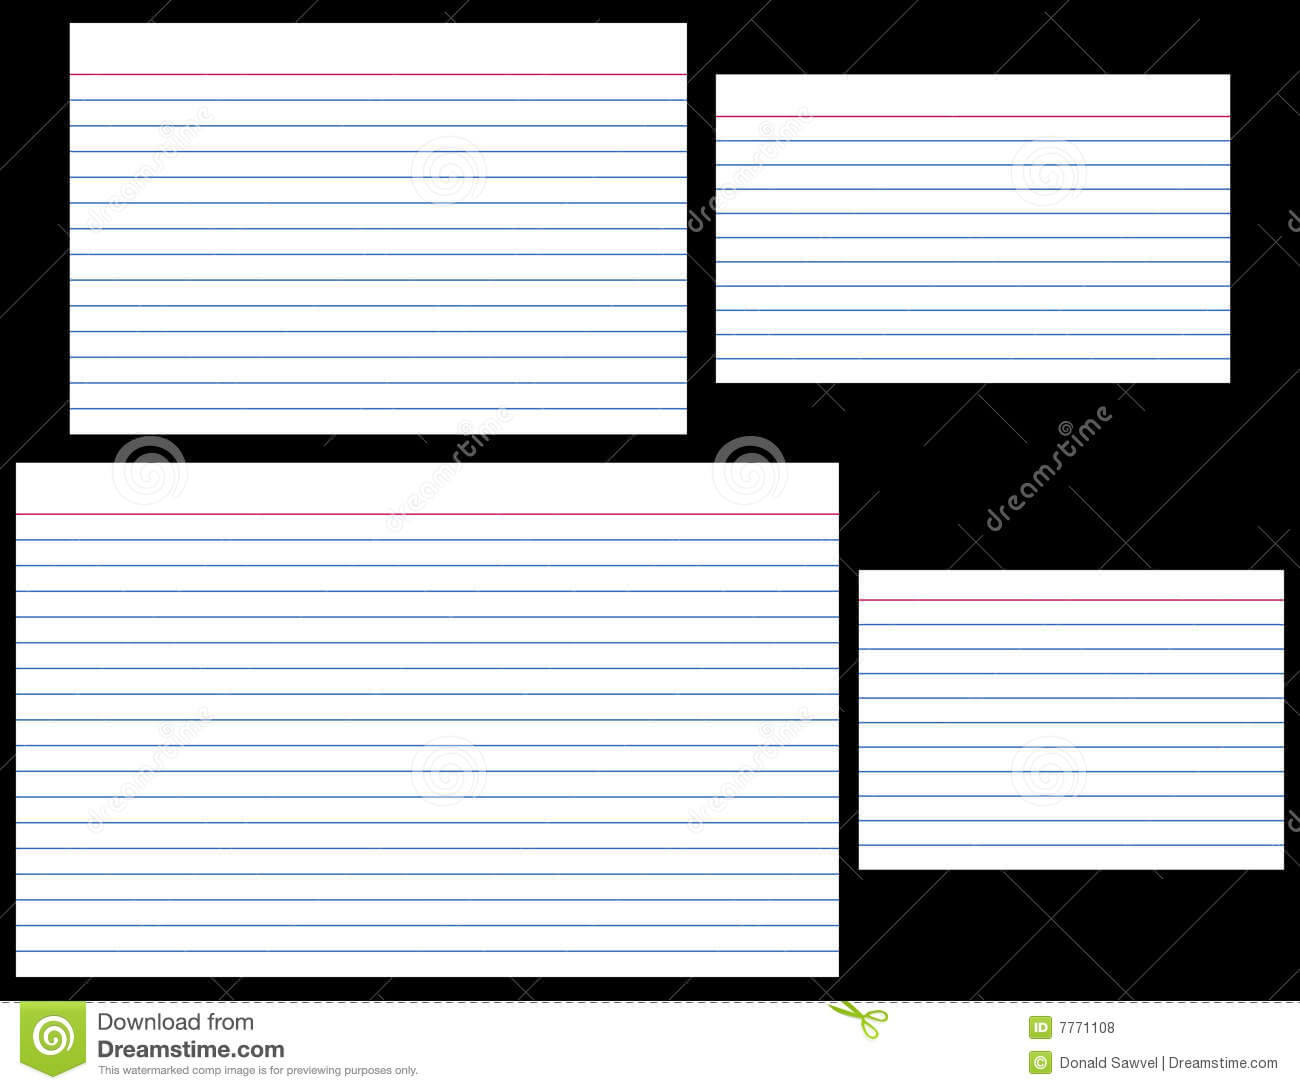 Index Cards Stock Vector. Illustration Of Stationery, Lined With Blank Index Card Template